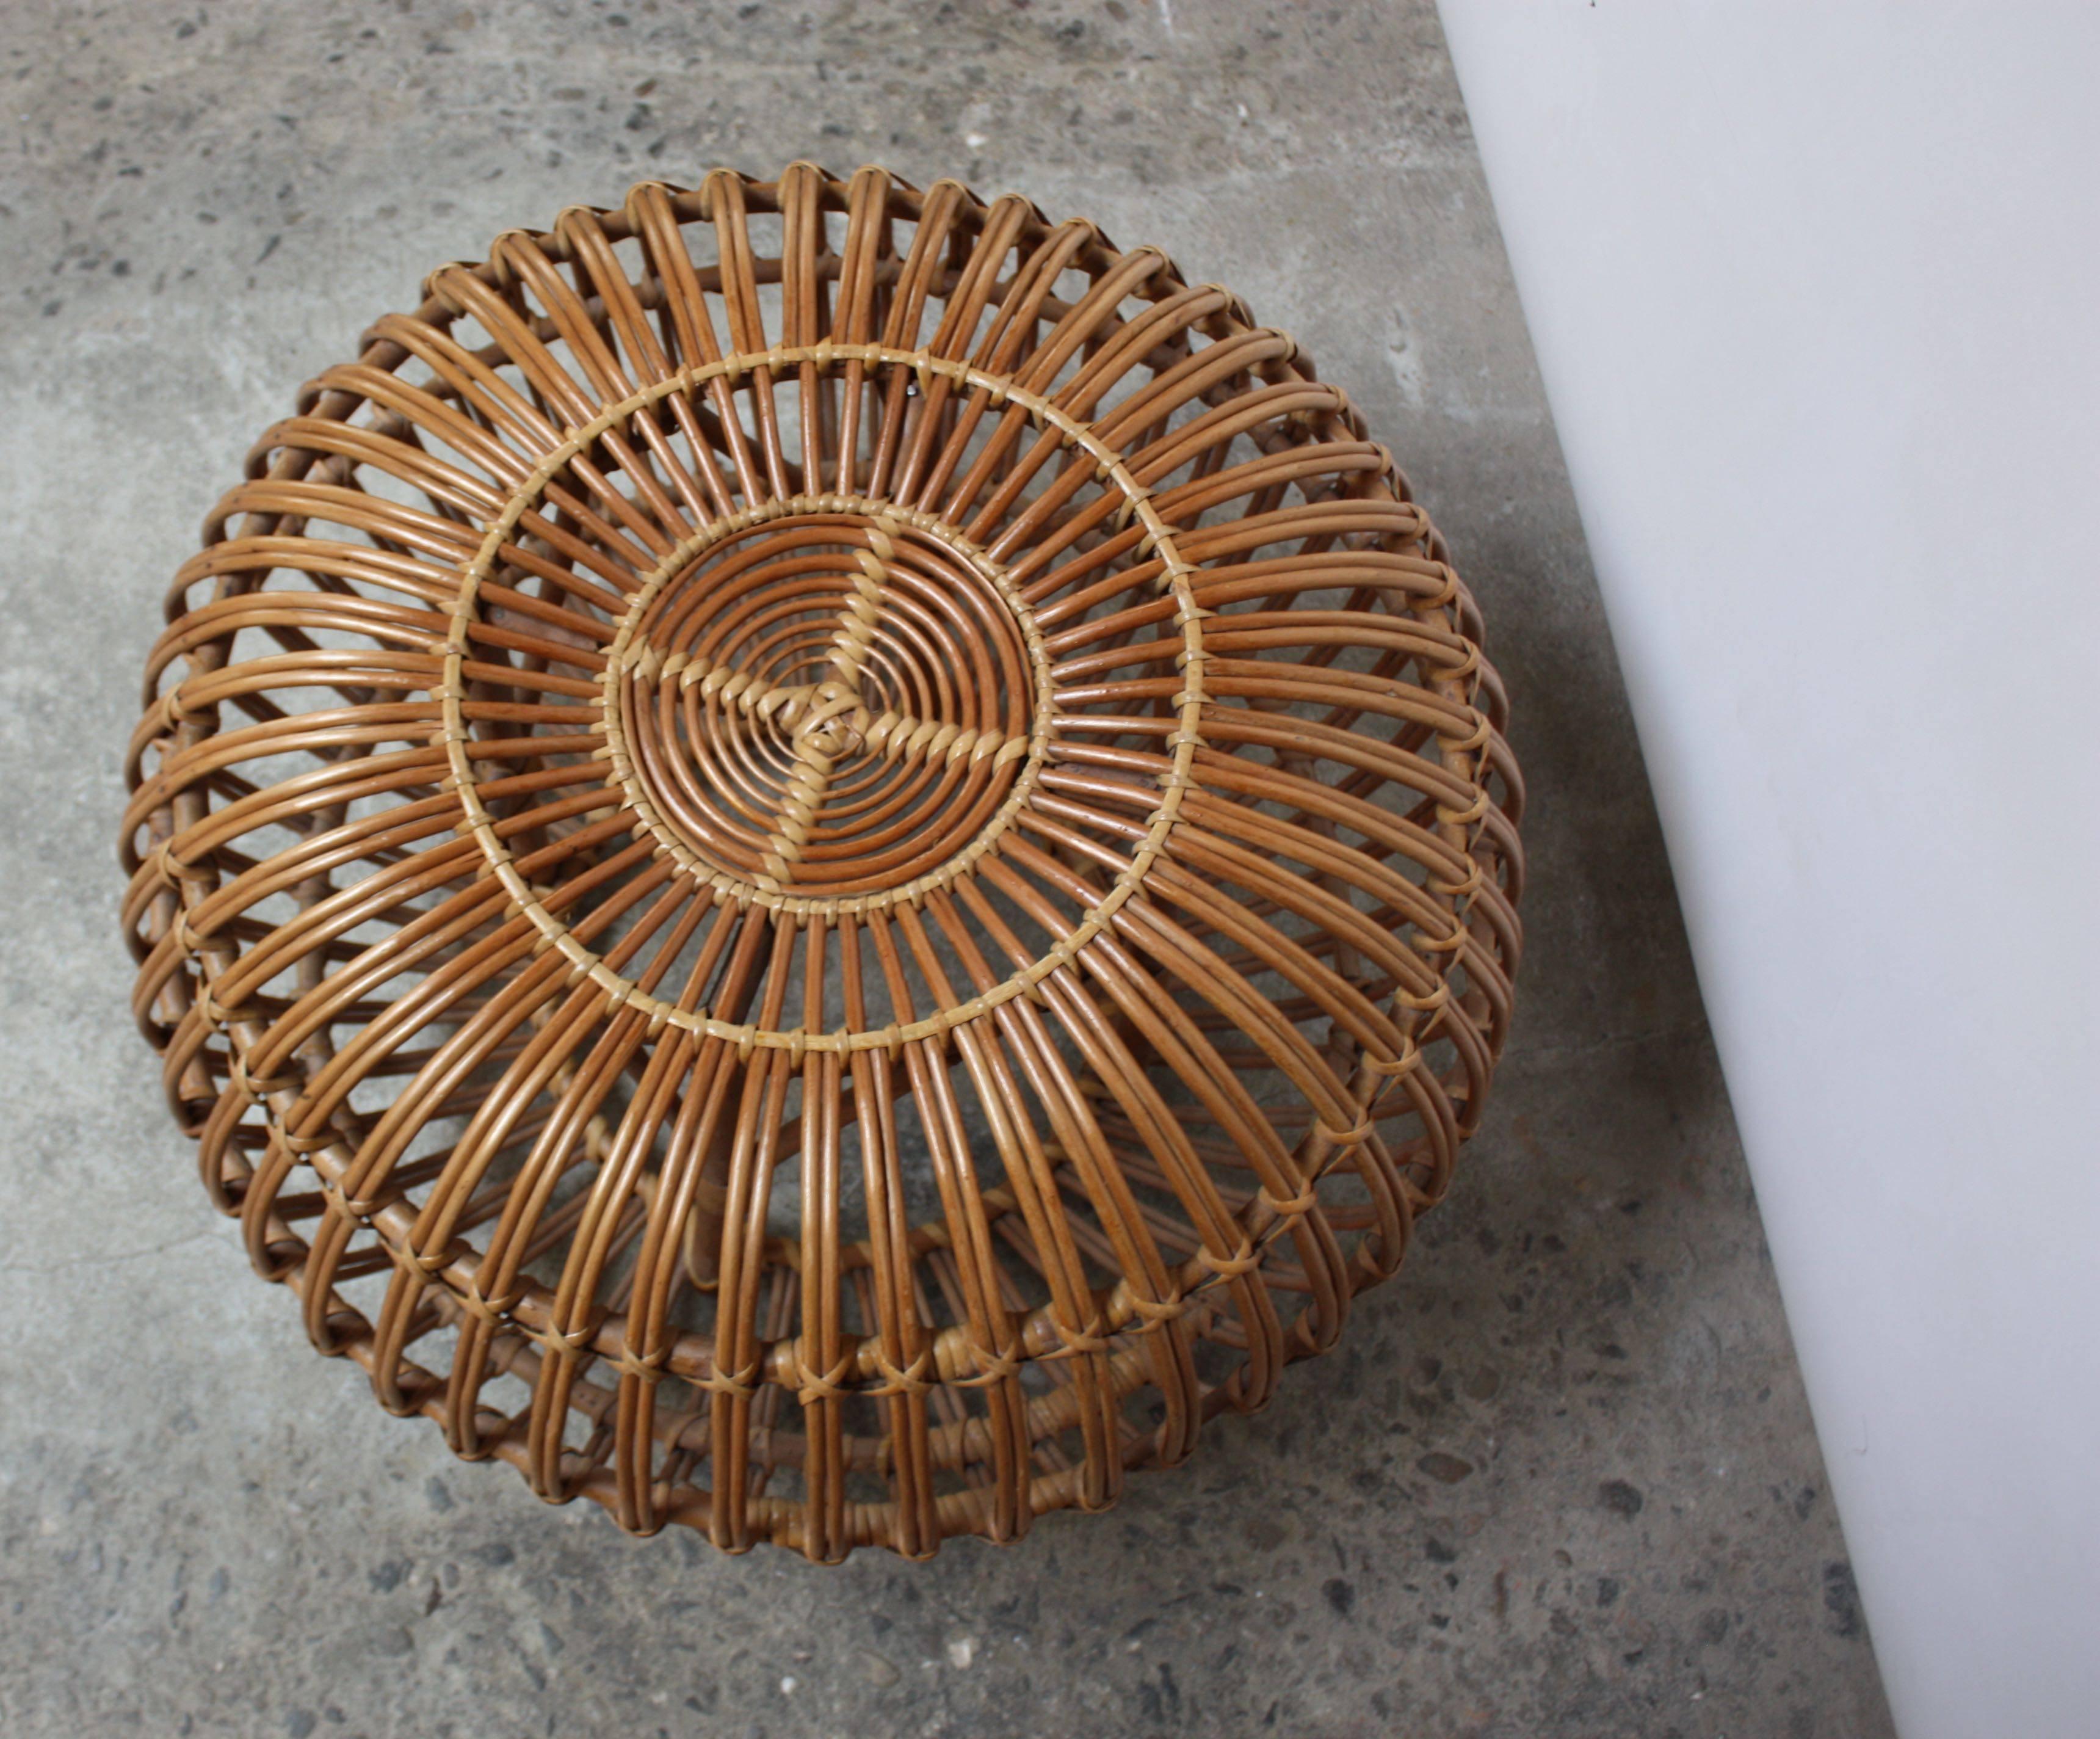 This rattan pouf or ottoman was designed by Franco Albini for Vittorio Bonacina in the 1950s and is comprised solely of bent-rattan weaving. There is minor loss (the 'cross stitch' is missing on a few strands of the rattan). Otherwise, all vertical